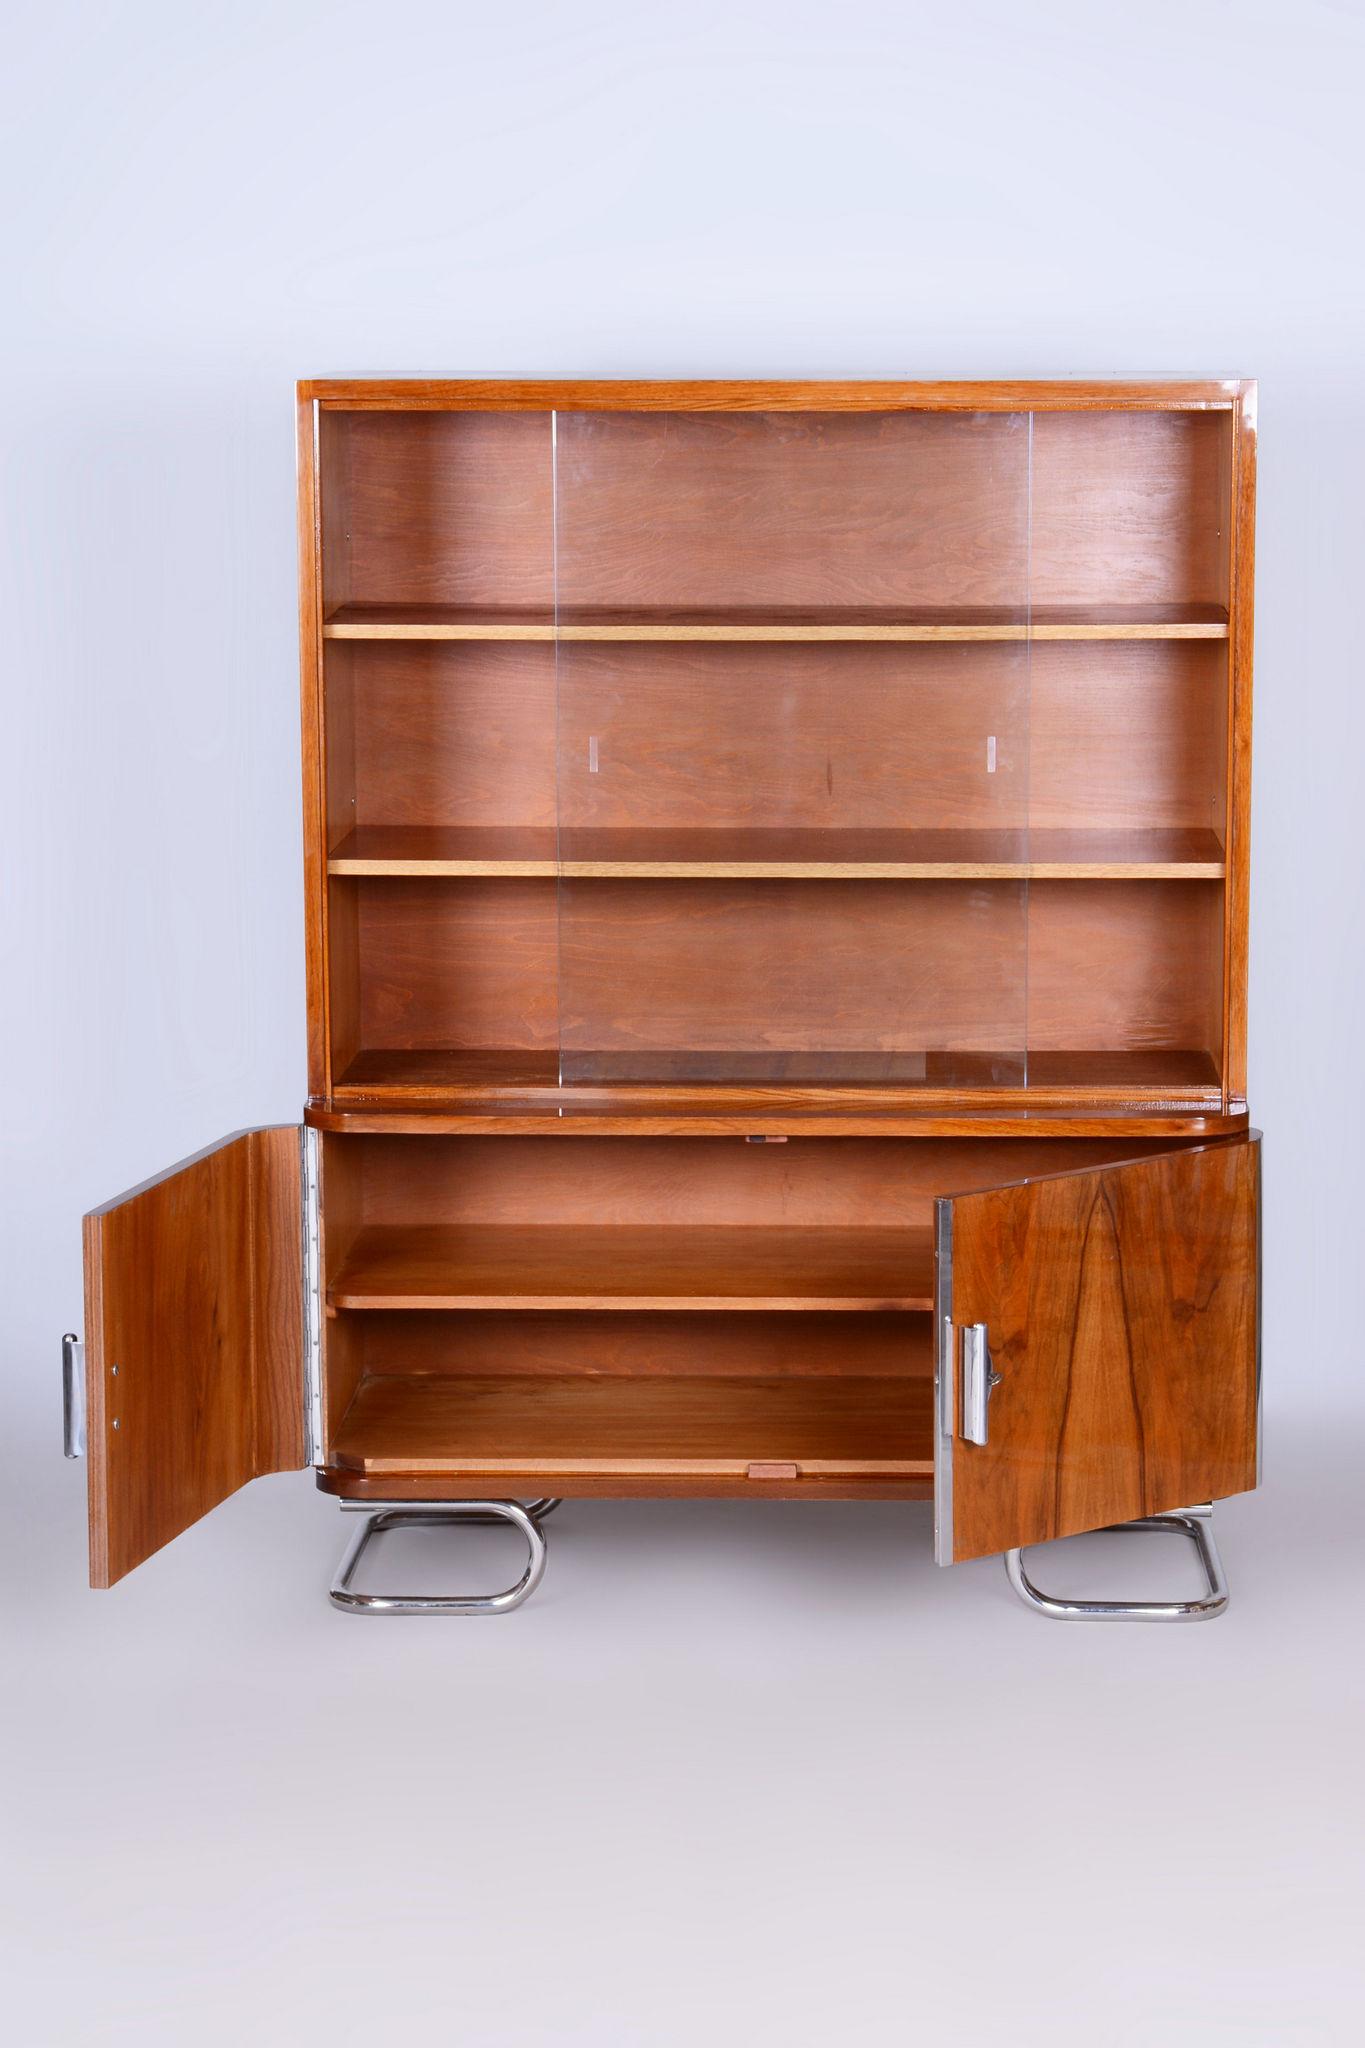 Restored Art Deco Bookcase, by Vichr a spol., Walnut, Glass, Czech, 1930s In Good Condition For Sale In Horomerice, CZ